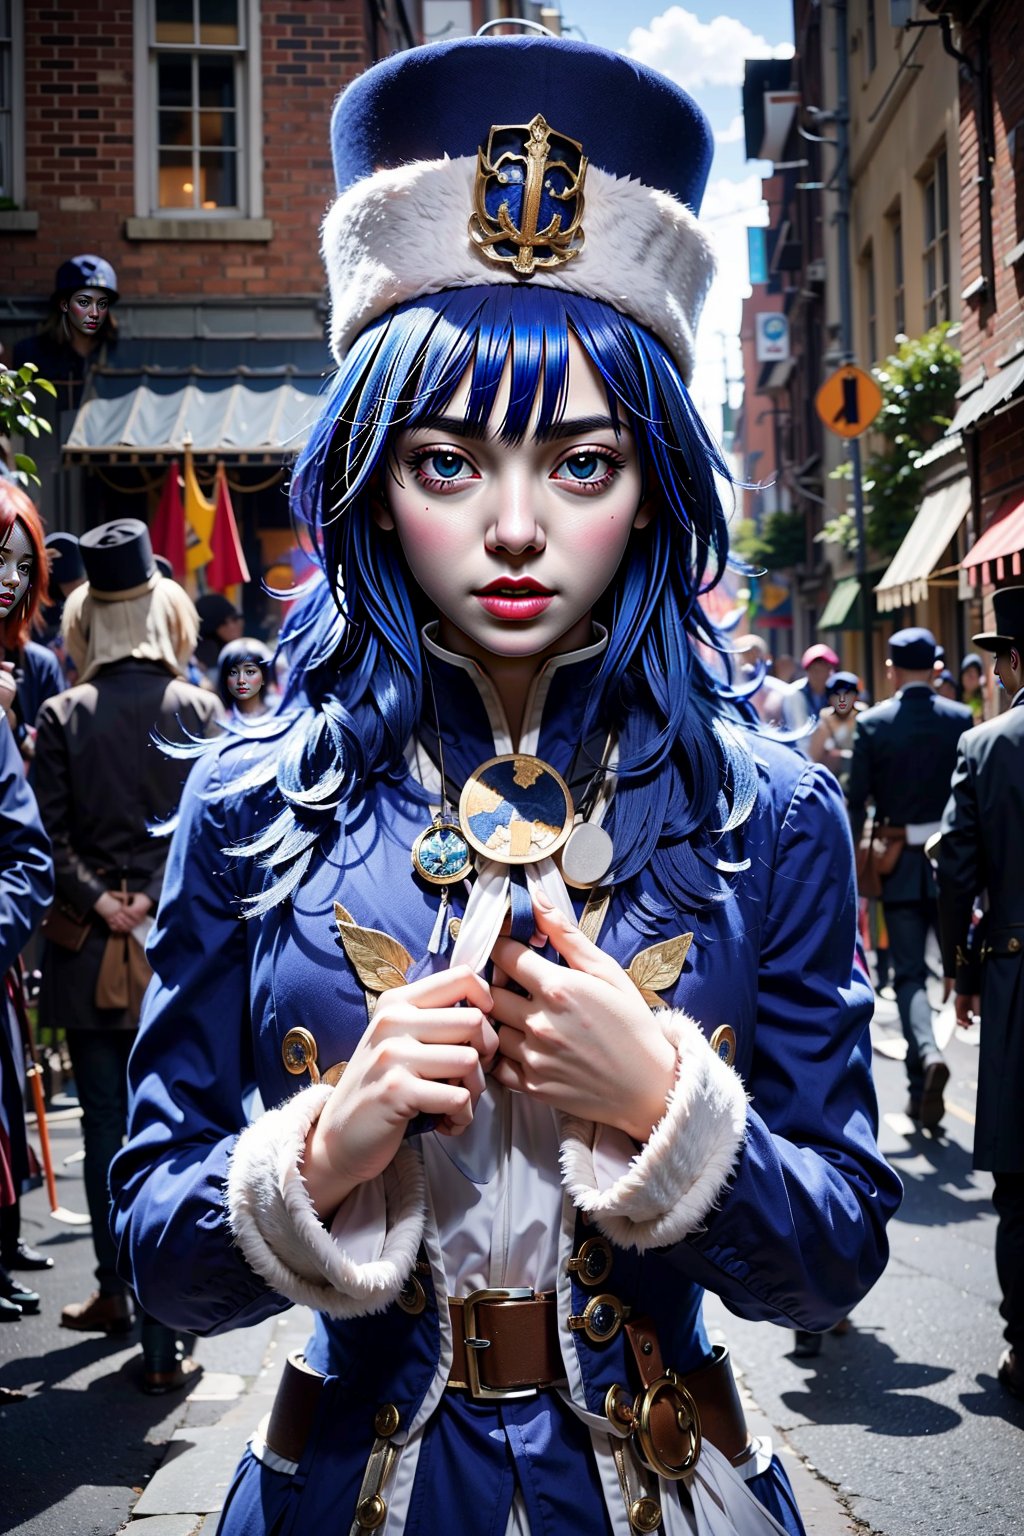 Masterpiece, Best quality, High resolutions, Masterpiece, Best quality, High resolutions, realistic version, young girl's face, beautiful
short blue hair with straight bangs and a colorful headband. Her eyes are also blue. The guild mark is on her left leg and is blue. She wears a navy blue coat, a shoulder-length shawl that she tied to the Teru Teru Bozu. plus a Russian Cossack hat, aajuvia, long hair, blue headdress,
,aajuvia,pale white,EpicMakeup,portrait,illustration,fcloseup,rgbcolor,JuviaLockserrealista,JuviaLockserreal